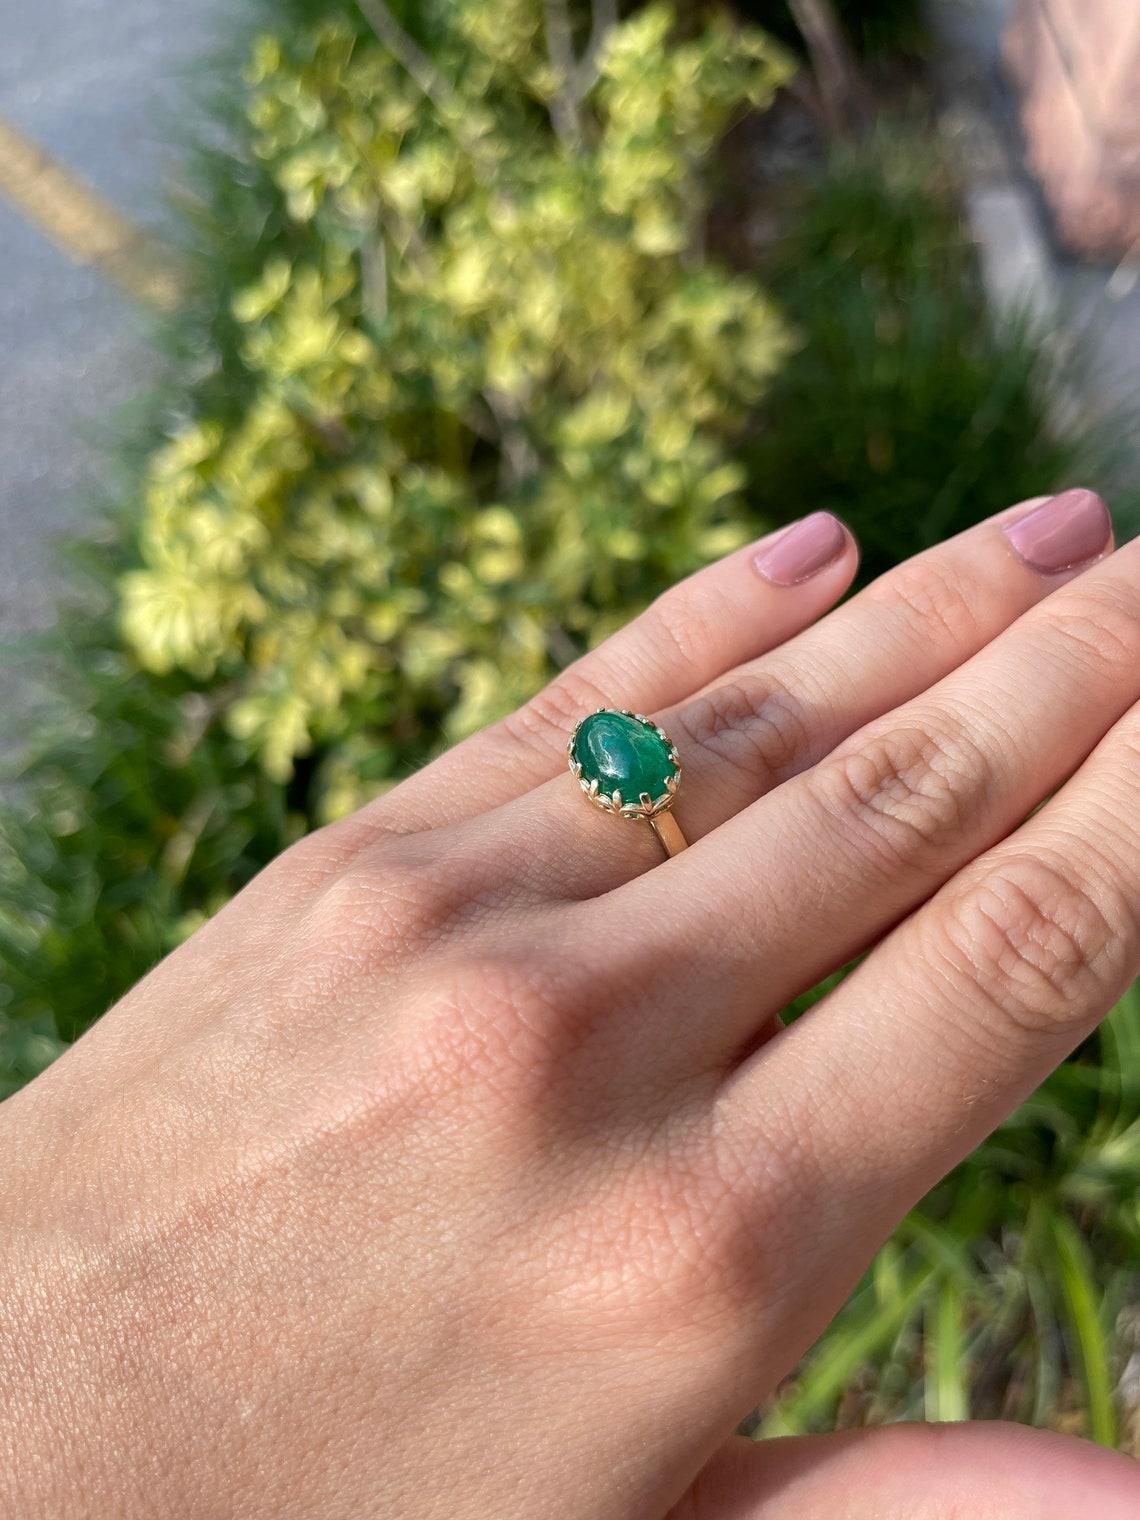 Artsy 5.47cts 14K Cabochon Emerald Real Earth Mined Organic Solitaire Ring Gift In New Condition For Sale In Jupiter, FL